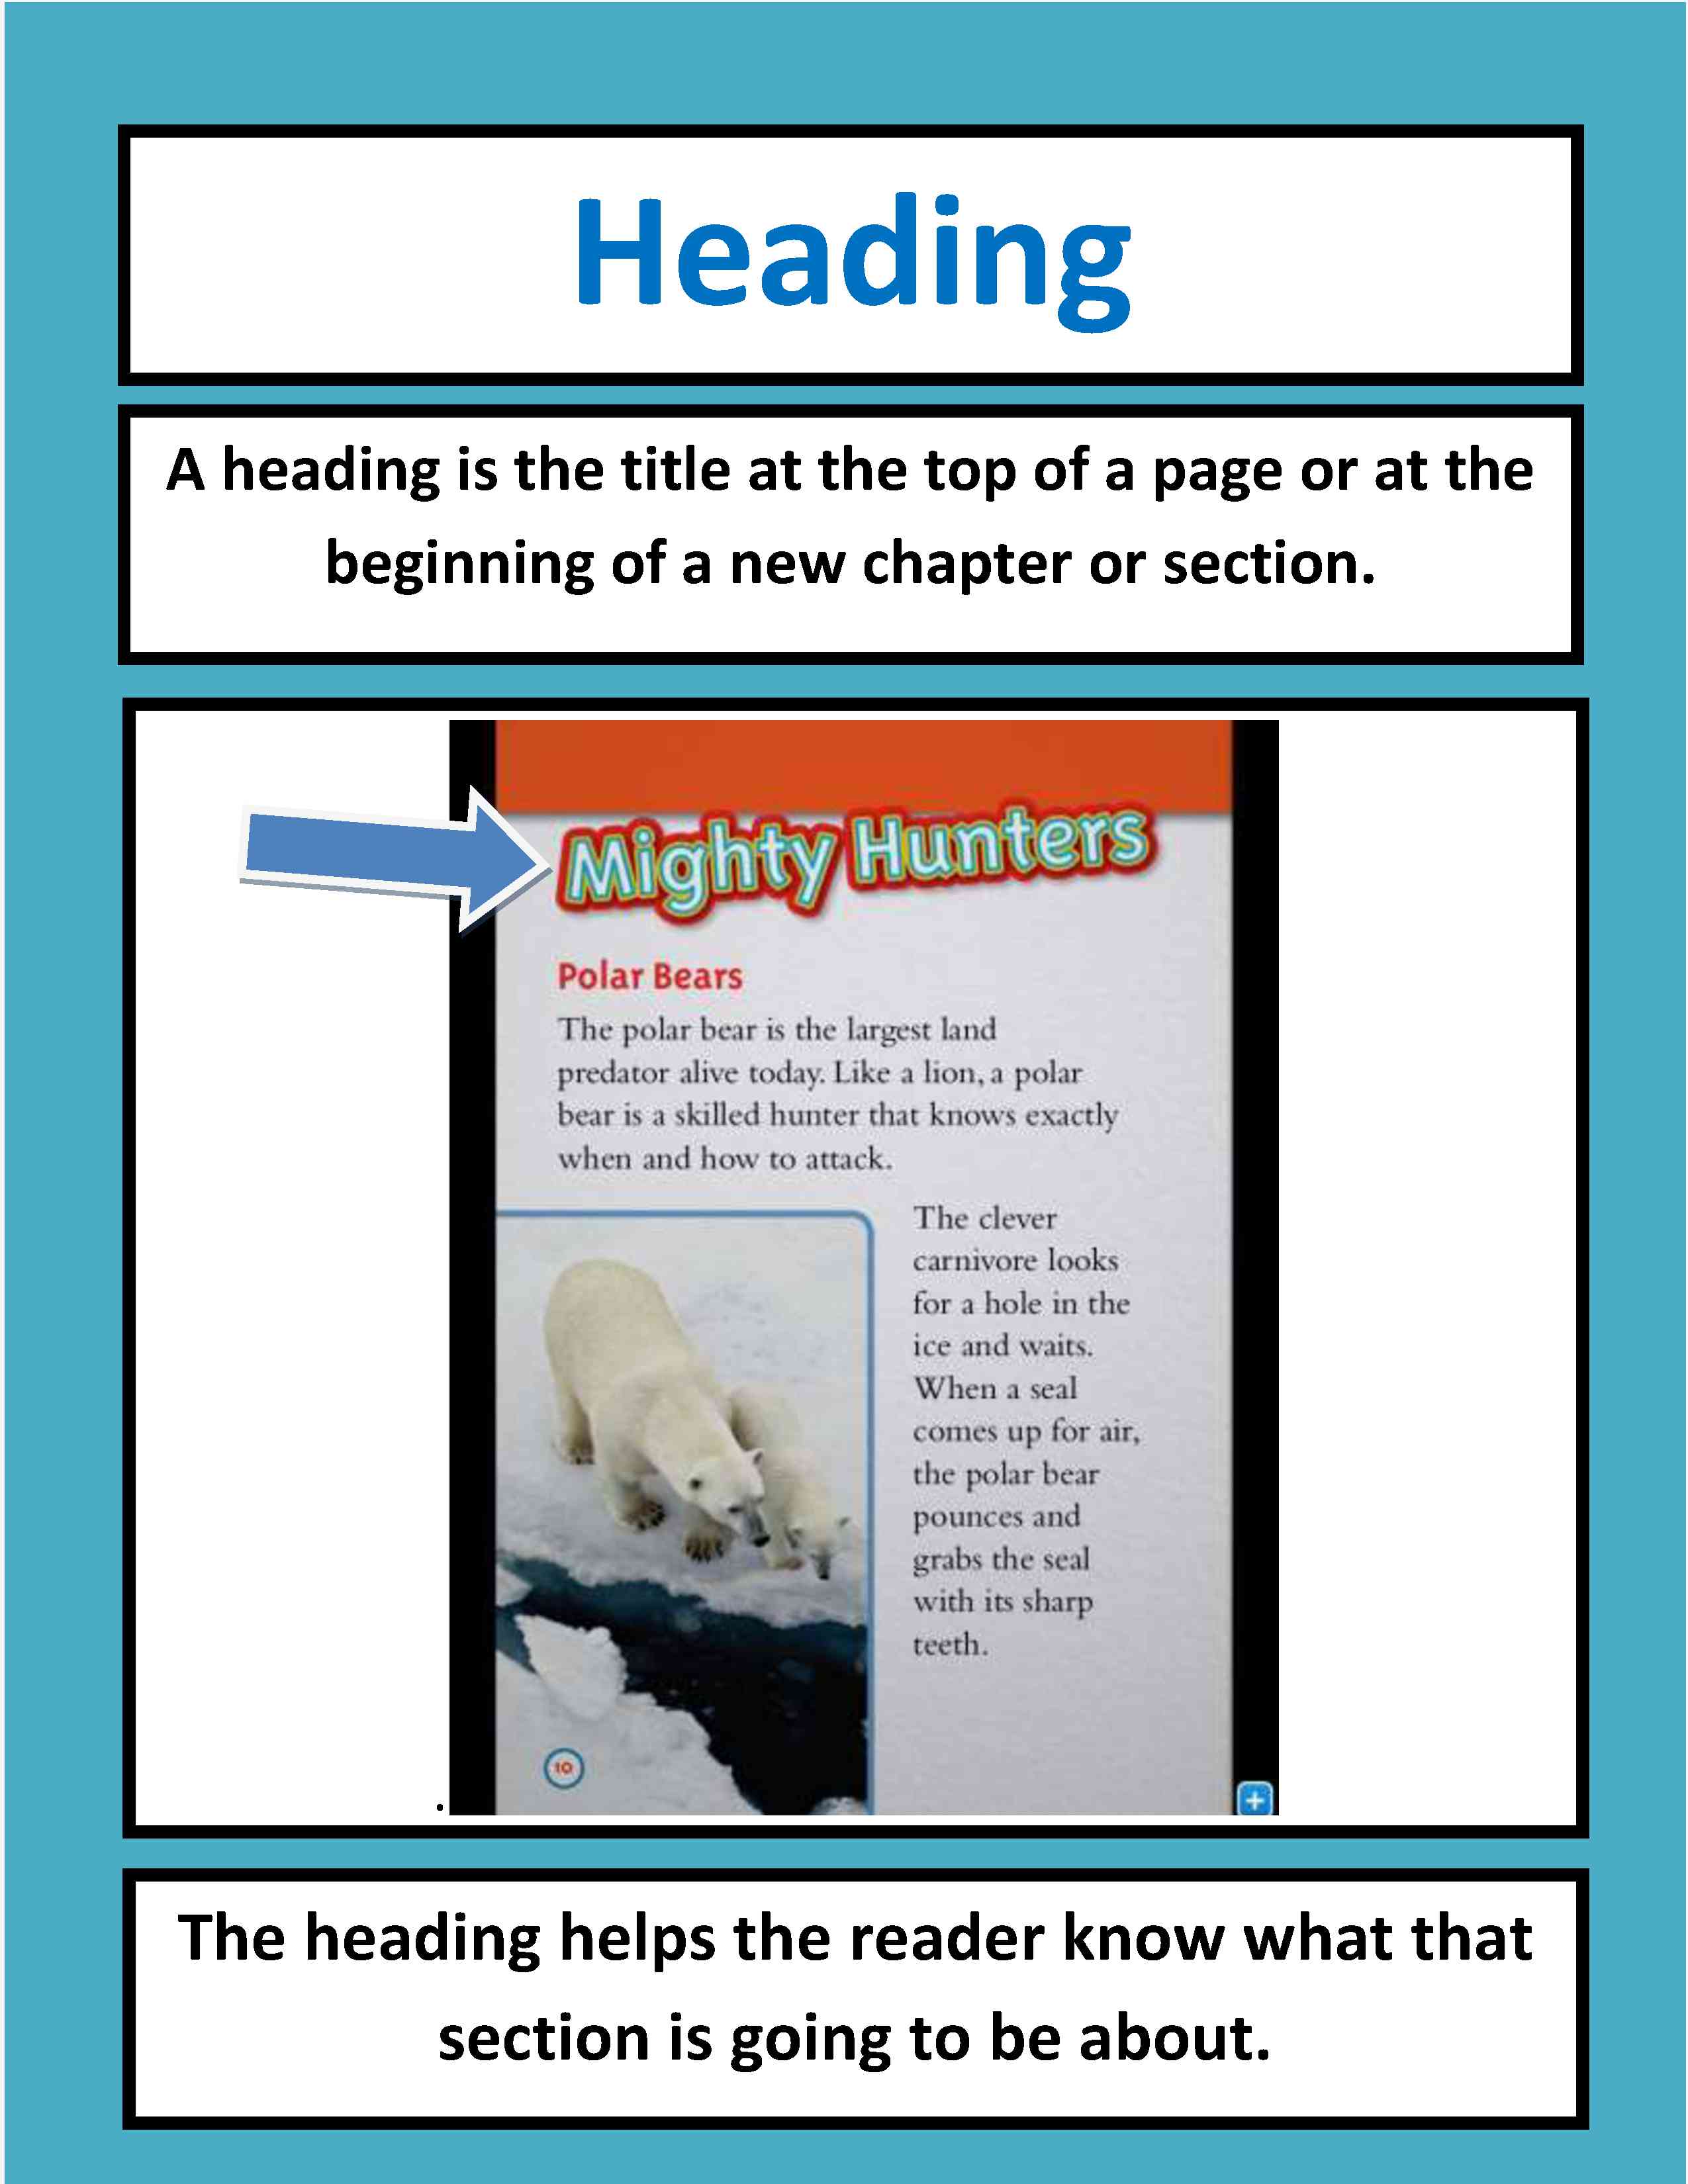 navigating-nonfiction-text-in-the-common-core-classroom-part-1